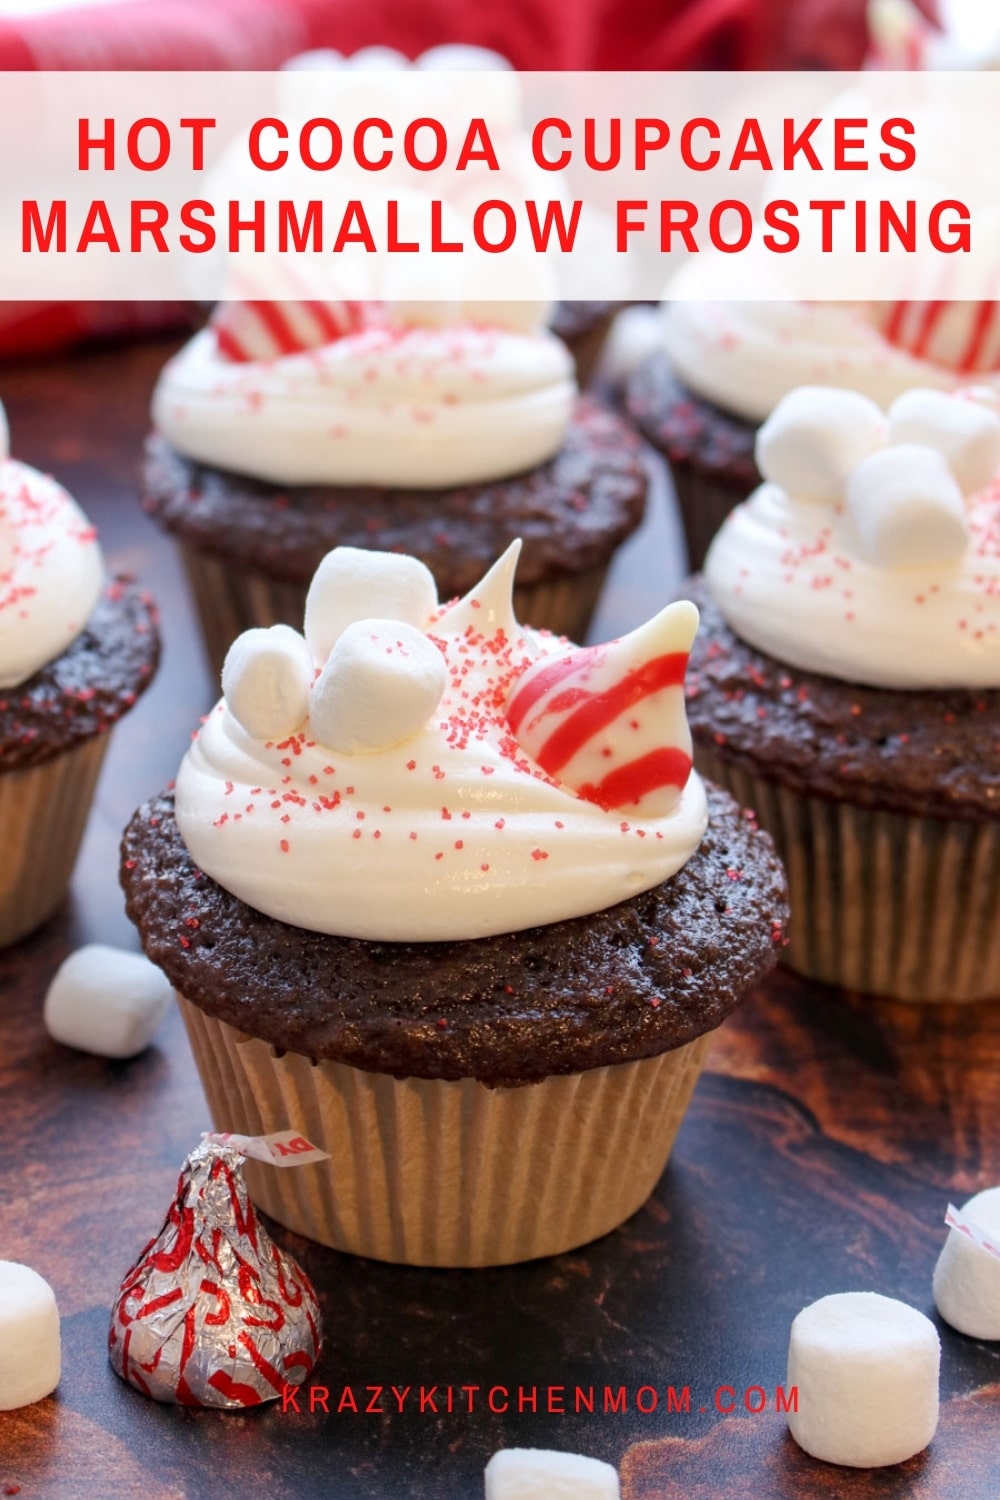 These cupcakes are made using easy store-bought ingredients for a moist, rich, and yummy flavor, topped with creamy marshmallow frosting. via @krazykitchenmom